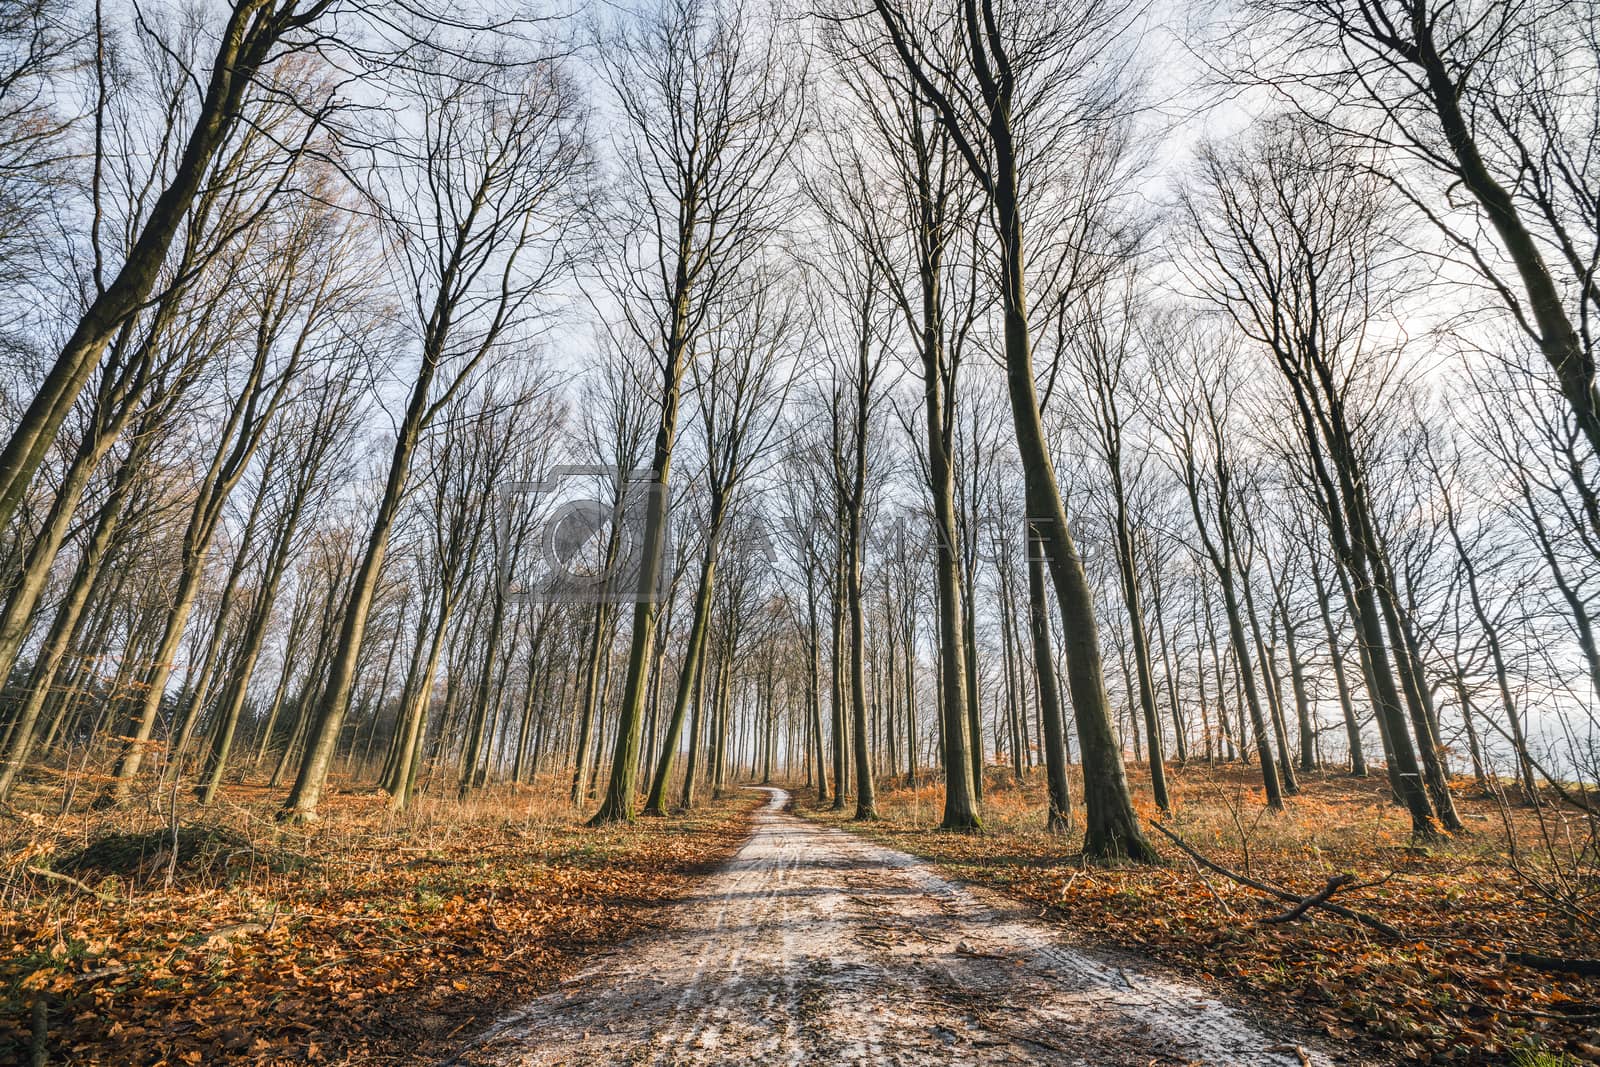 Royalty free image of Curvy road in a forest with tall trees by Sportactive